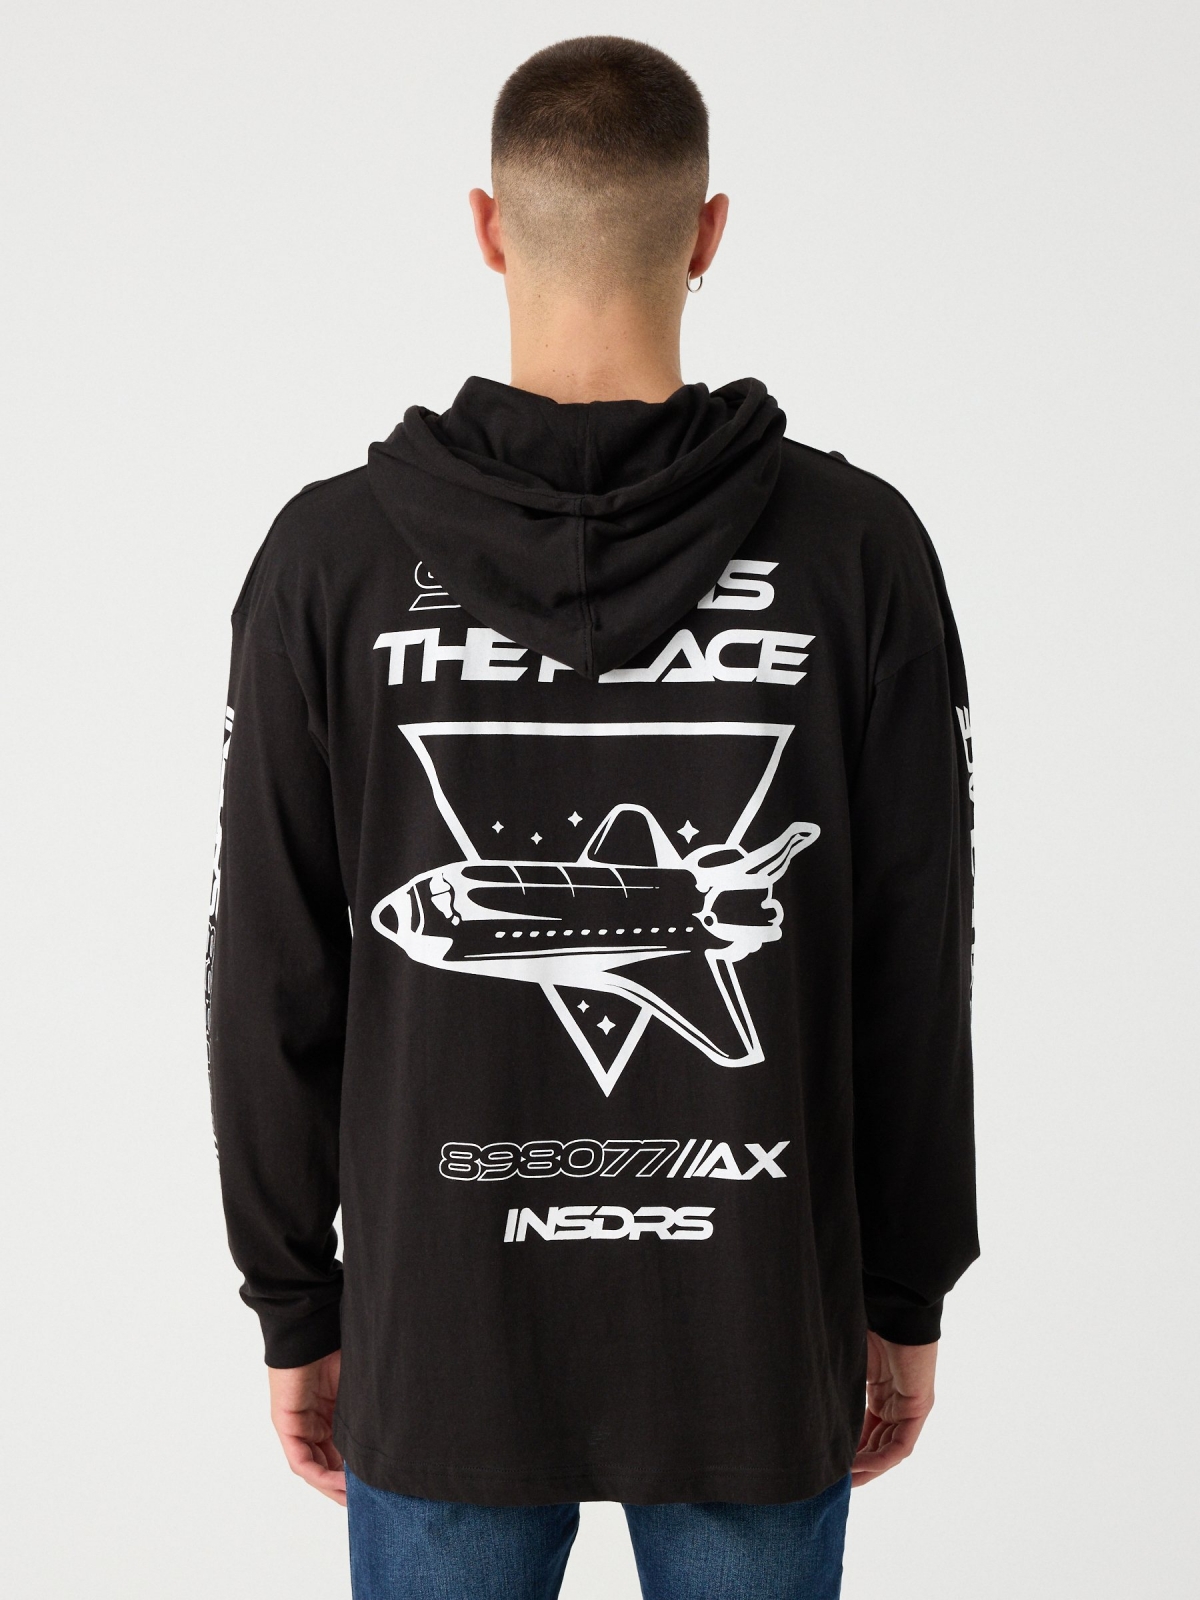 Space print hooded t-shirt black middle back view